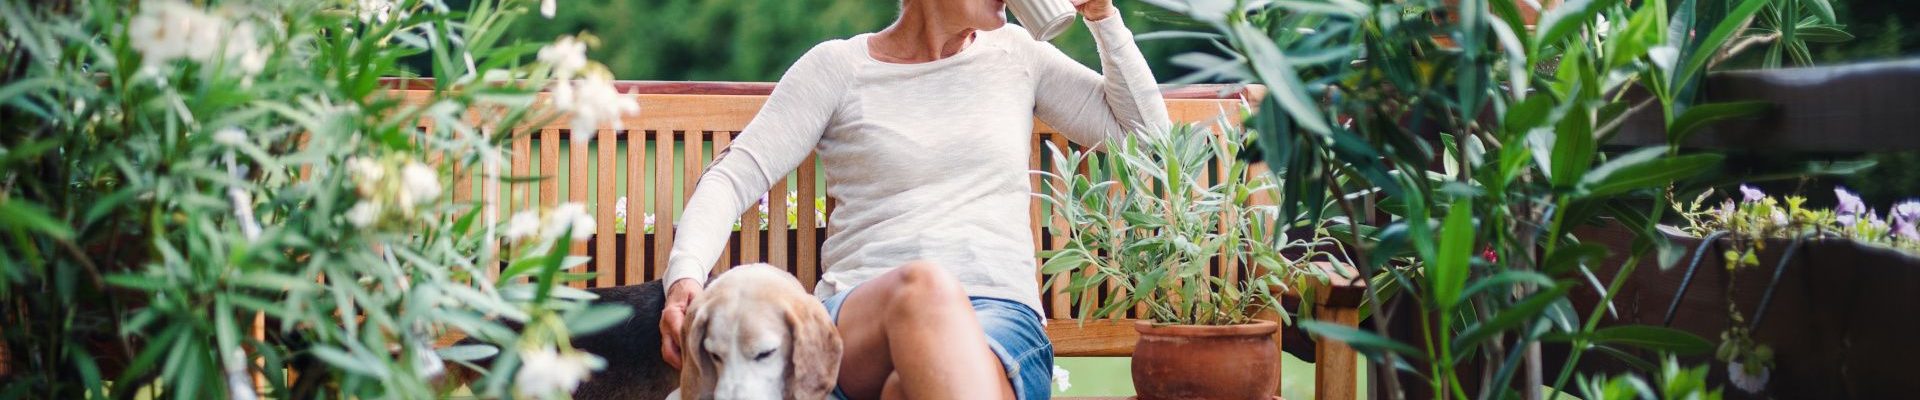 Woman drinking from a cup and relaxing with her dog on a bench in the garden